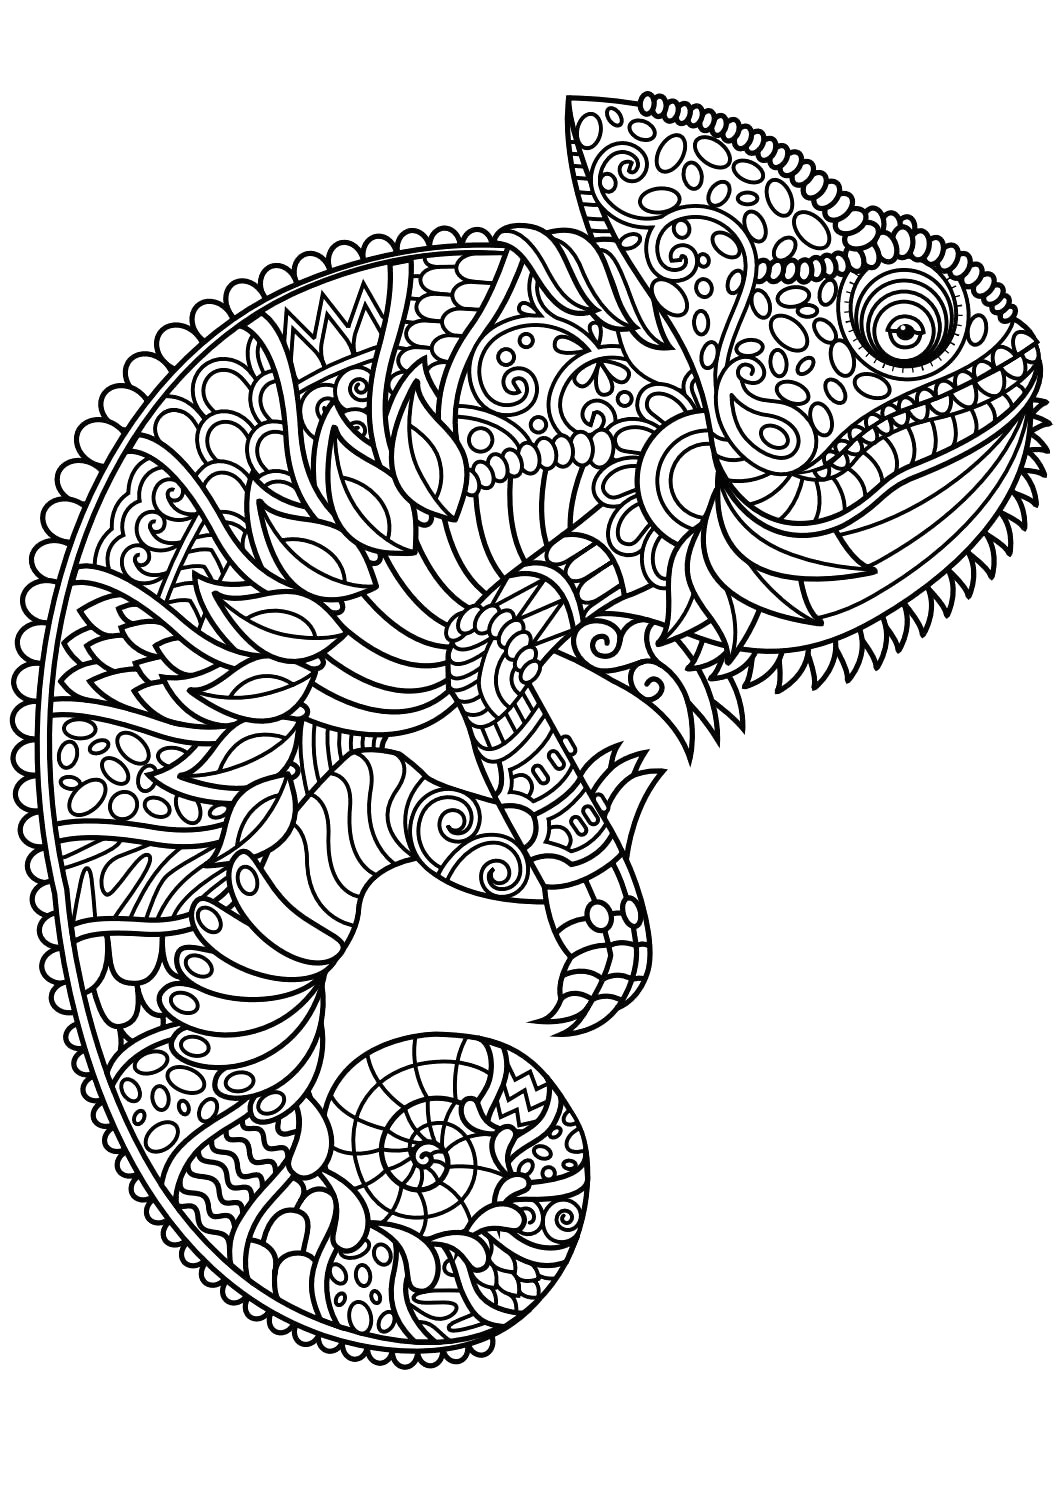 Dog Underwater Drawing Coloring Pages Of Dory Inspirational Cute Mandala Coloring Pages